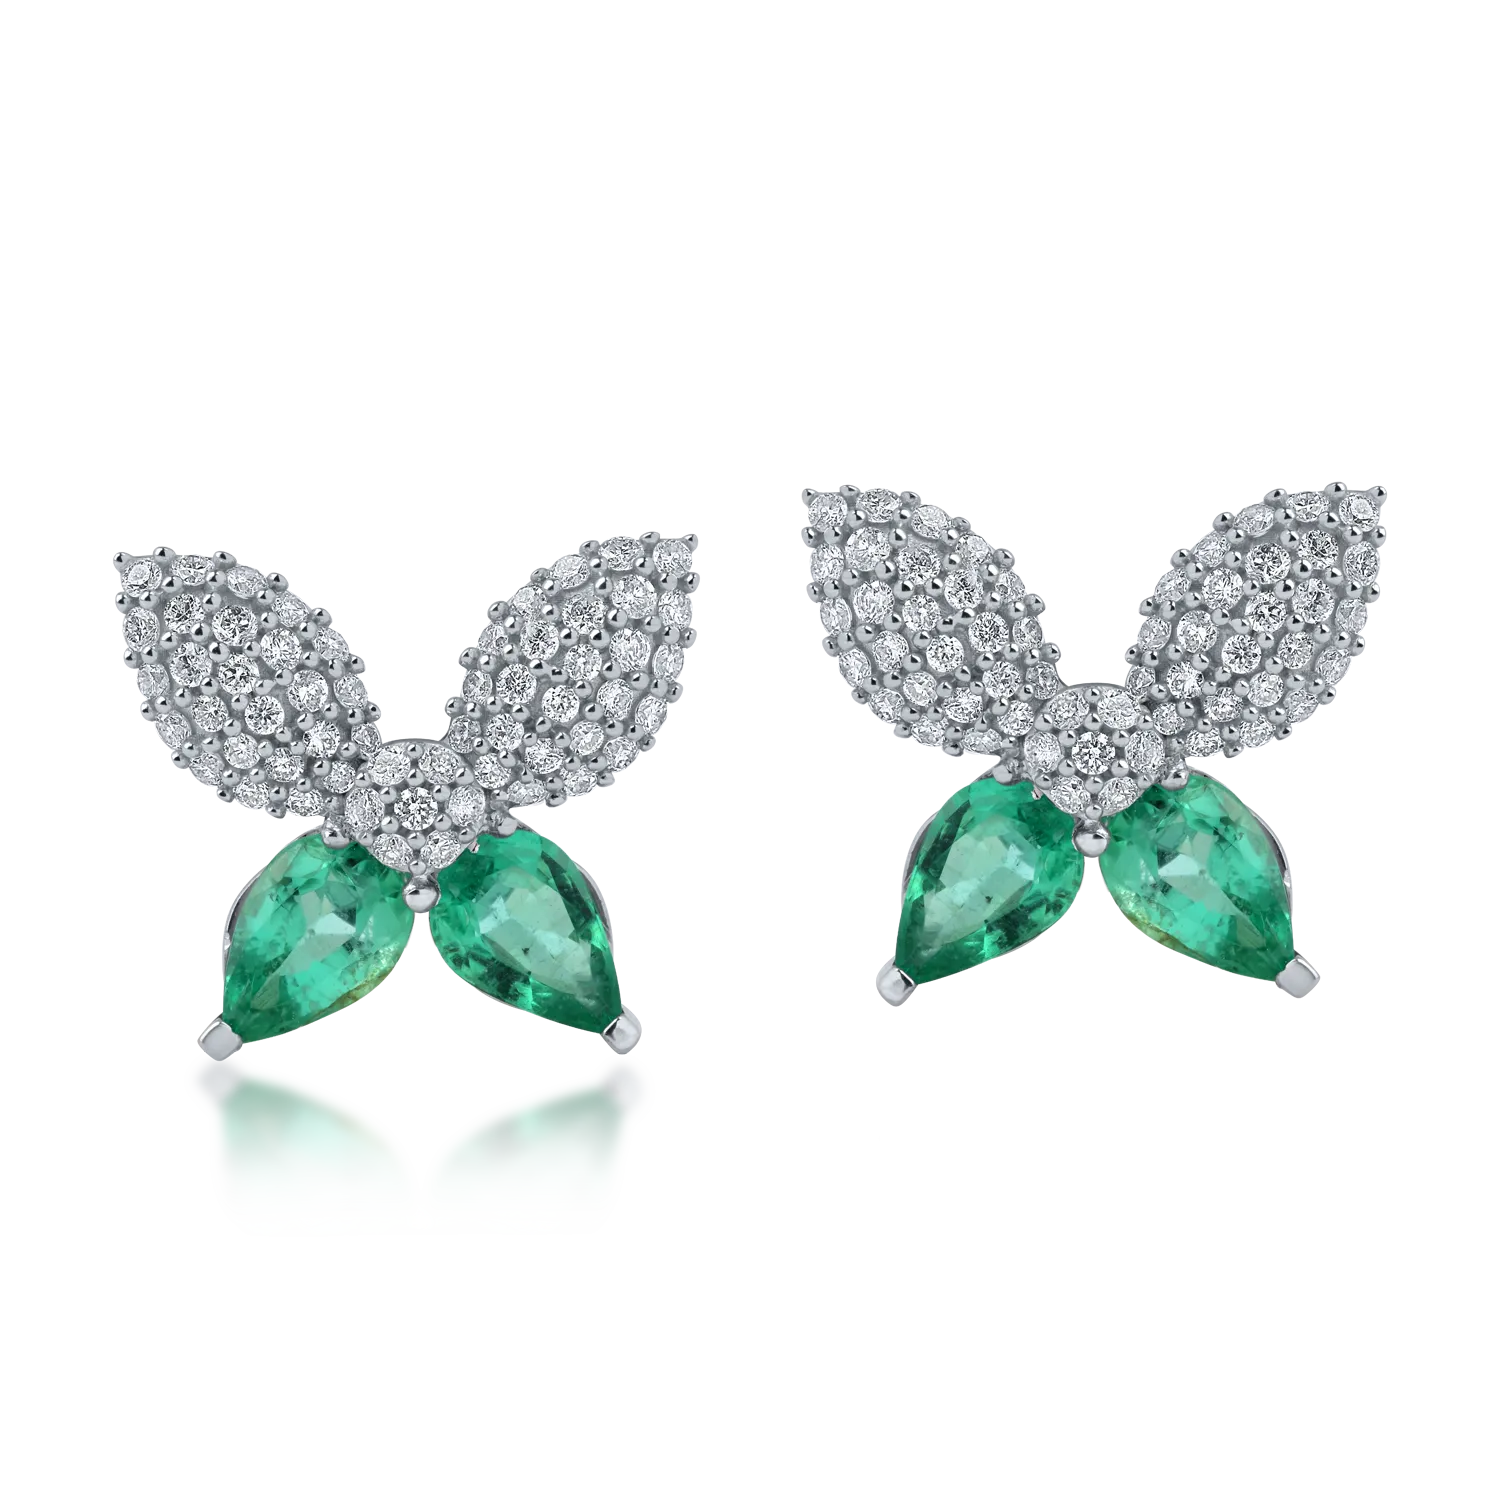 White gold butterfly earrings with 1.48ct emeralds and 0.57ct diamonds